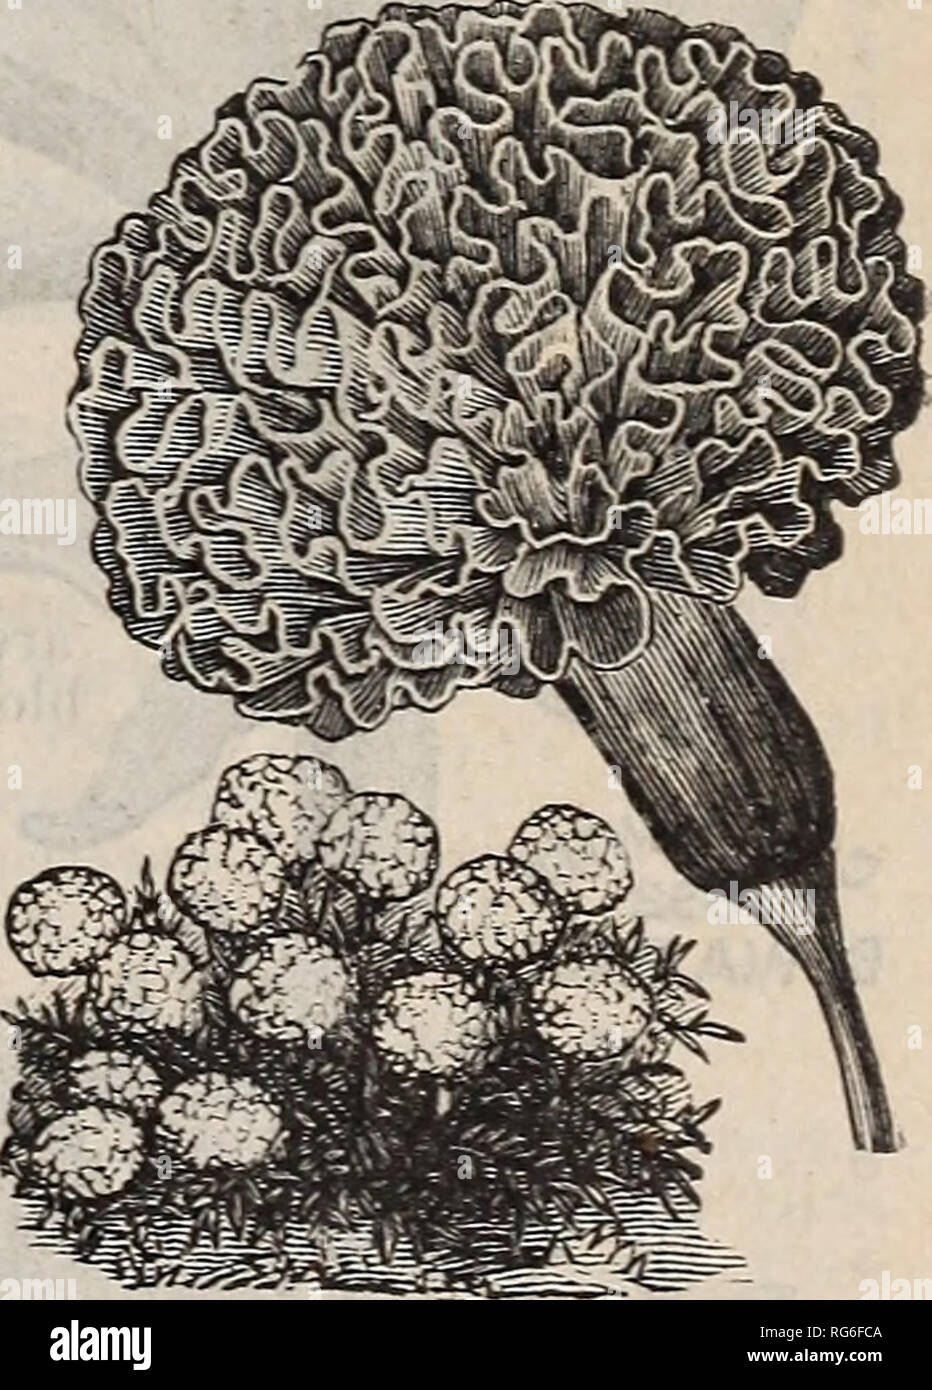 . Burpee's farm annual : the best seeds that grow including rare novelties. Nurseries (Horticulture) Pennsylvania Philadelphia Catalogs; Vegetables Seeds Catalogs; Fruit Catalogs; Plants, Ornamental Catalogs; Flowers Seeds Catalogs. A FLOWER OF THE DWARF PULCHRA MARIGOLD. MARIGOLDS (French Dwarf). Those who are familiar only with the tall or straggling Marigold can scarcely realize the unusual beauty of these dwarf, compact strains. per pkt. Brown Marble. The little plants when only six inches high are full of flowers, while the bushes are always very dwarf and compact, growing only eight to t Stock Photo